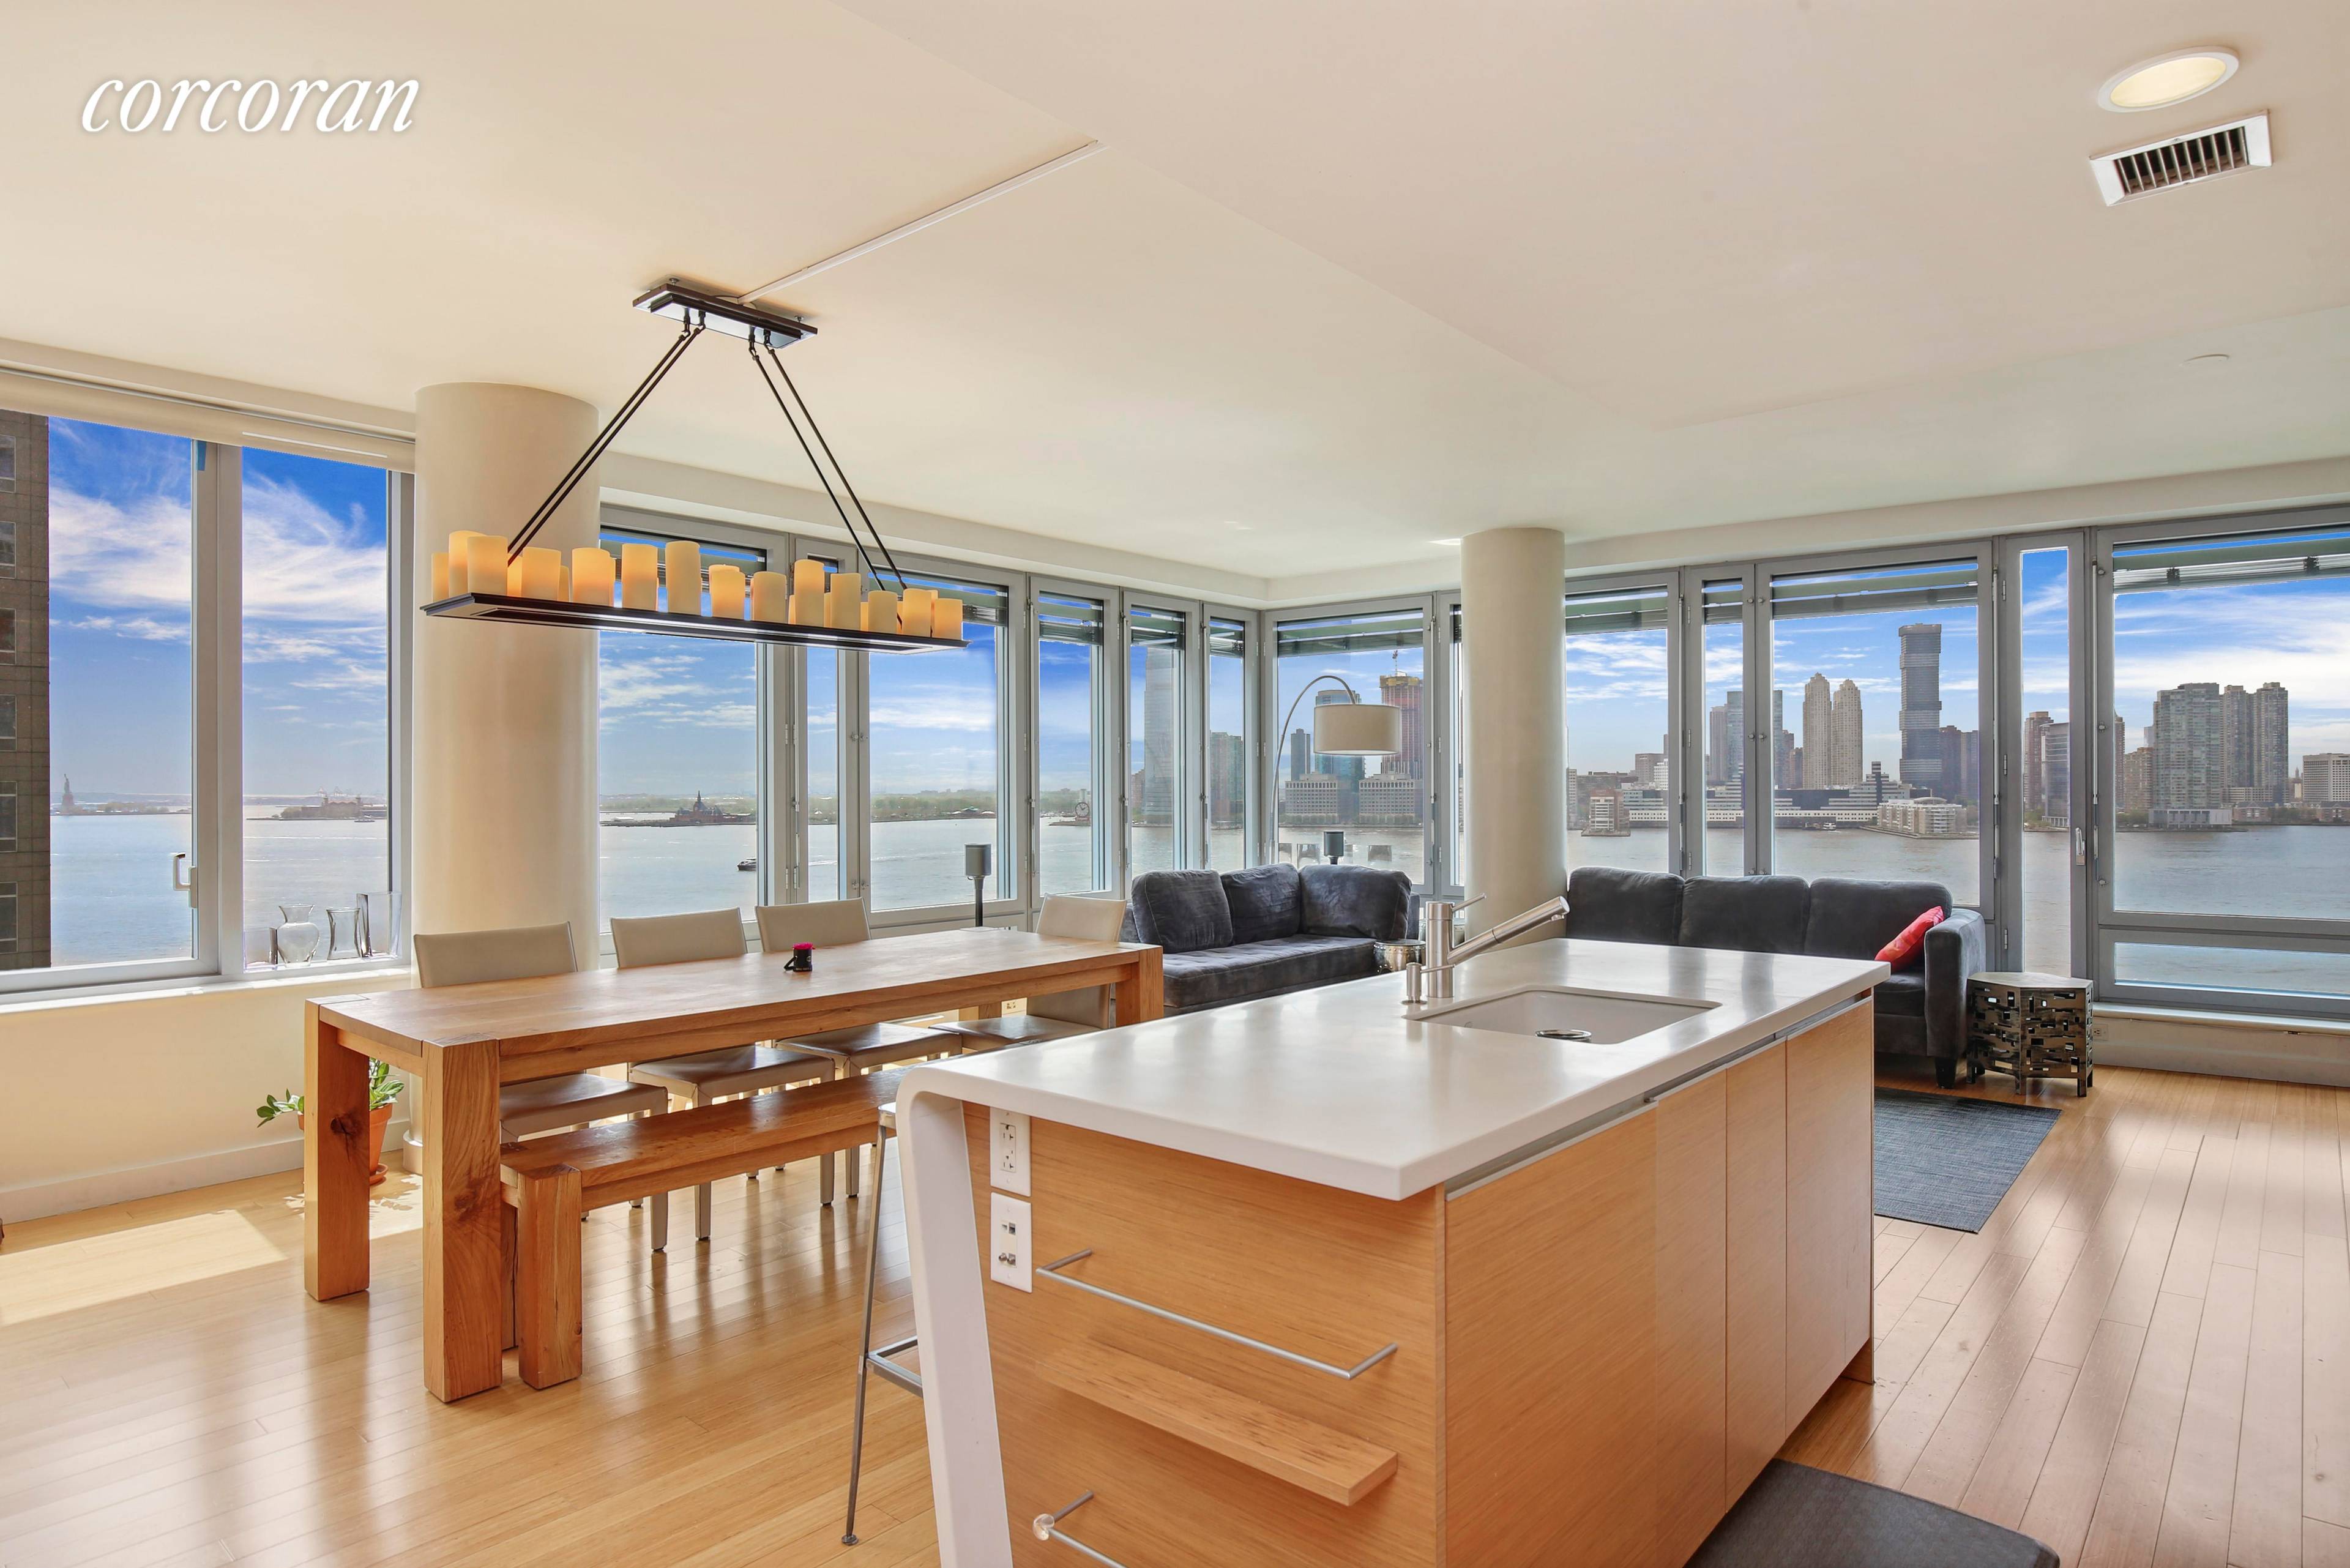 This is One of The Best Massive 3 Bedrooms 4 Bathrooms with Unobstructed Hudson River and Statue of Liberty Views !